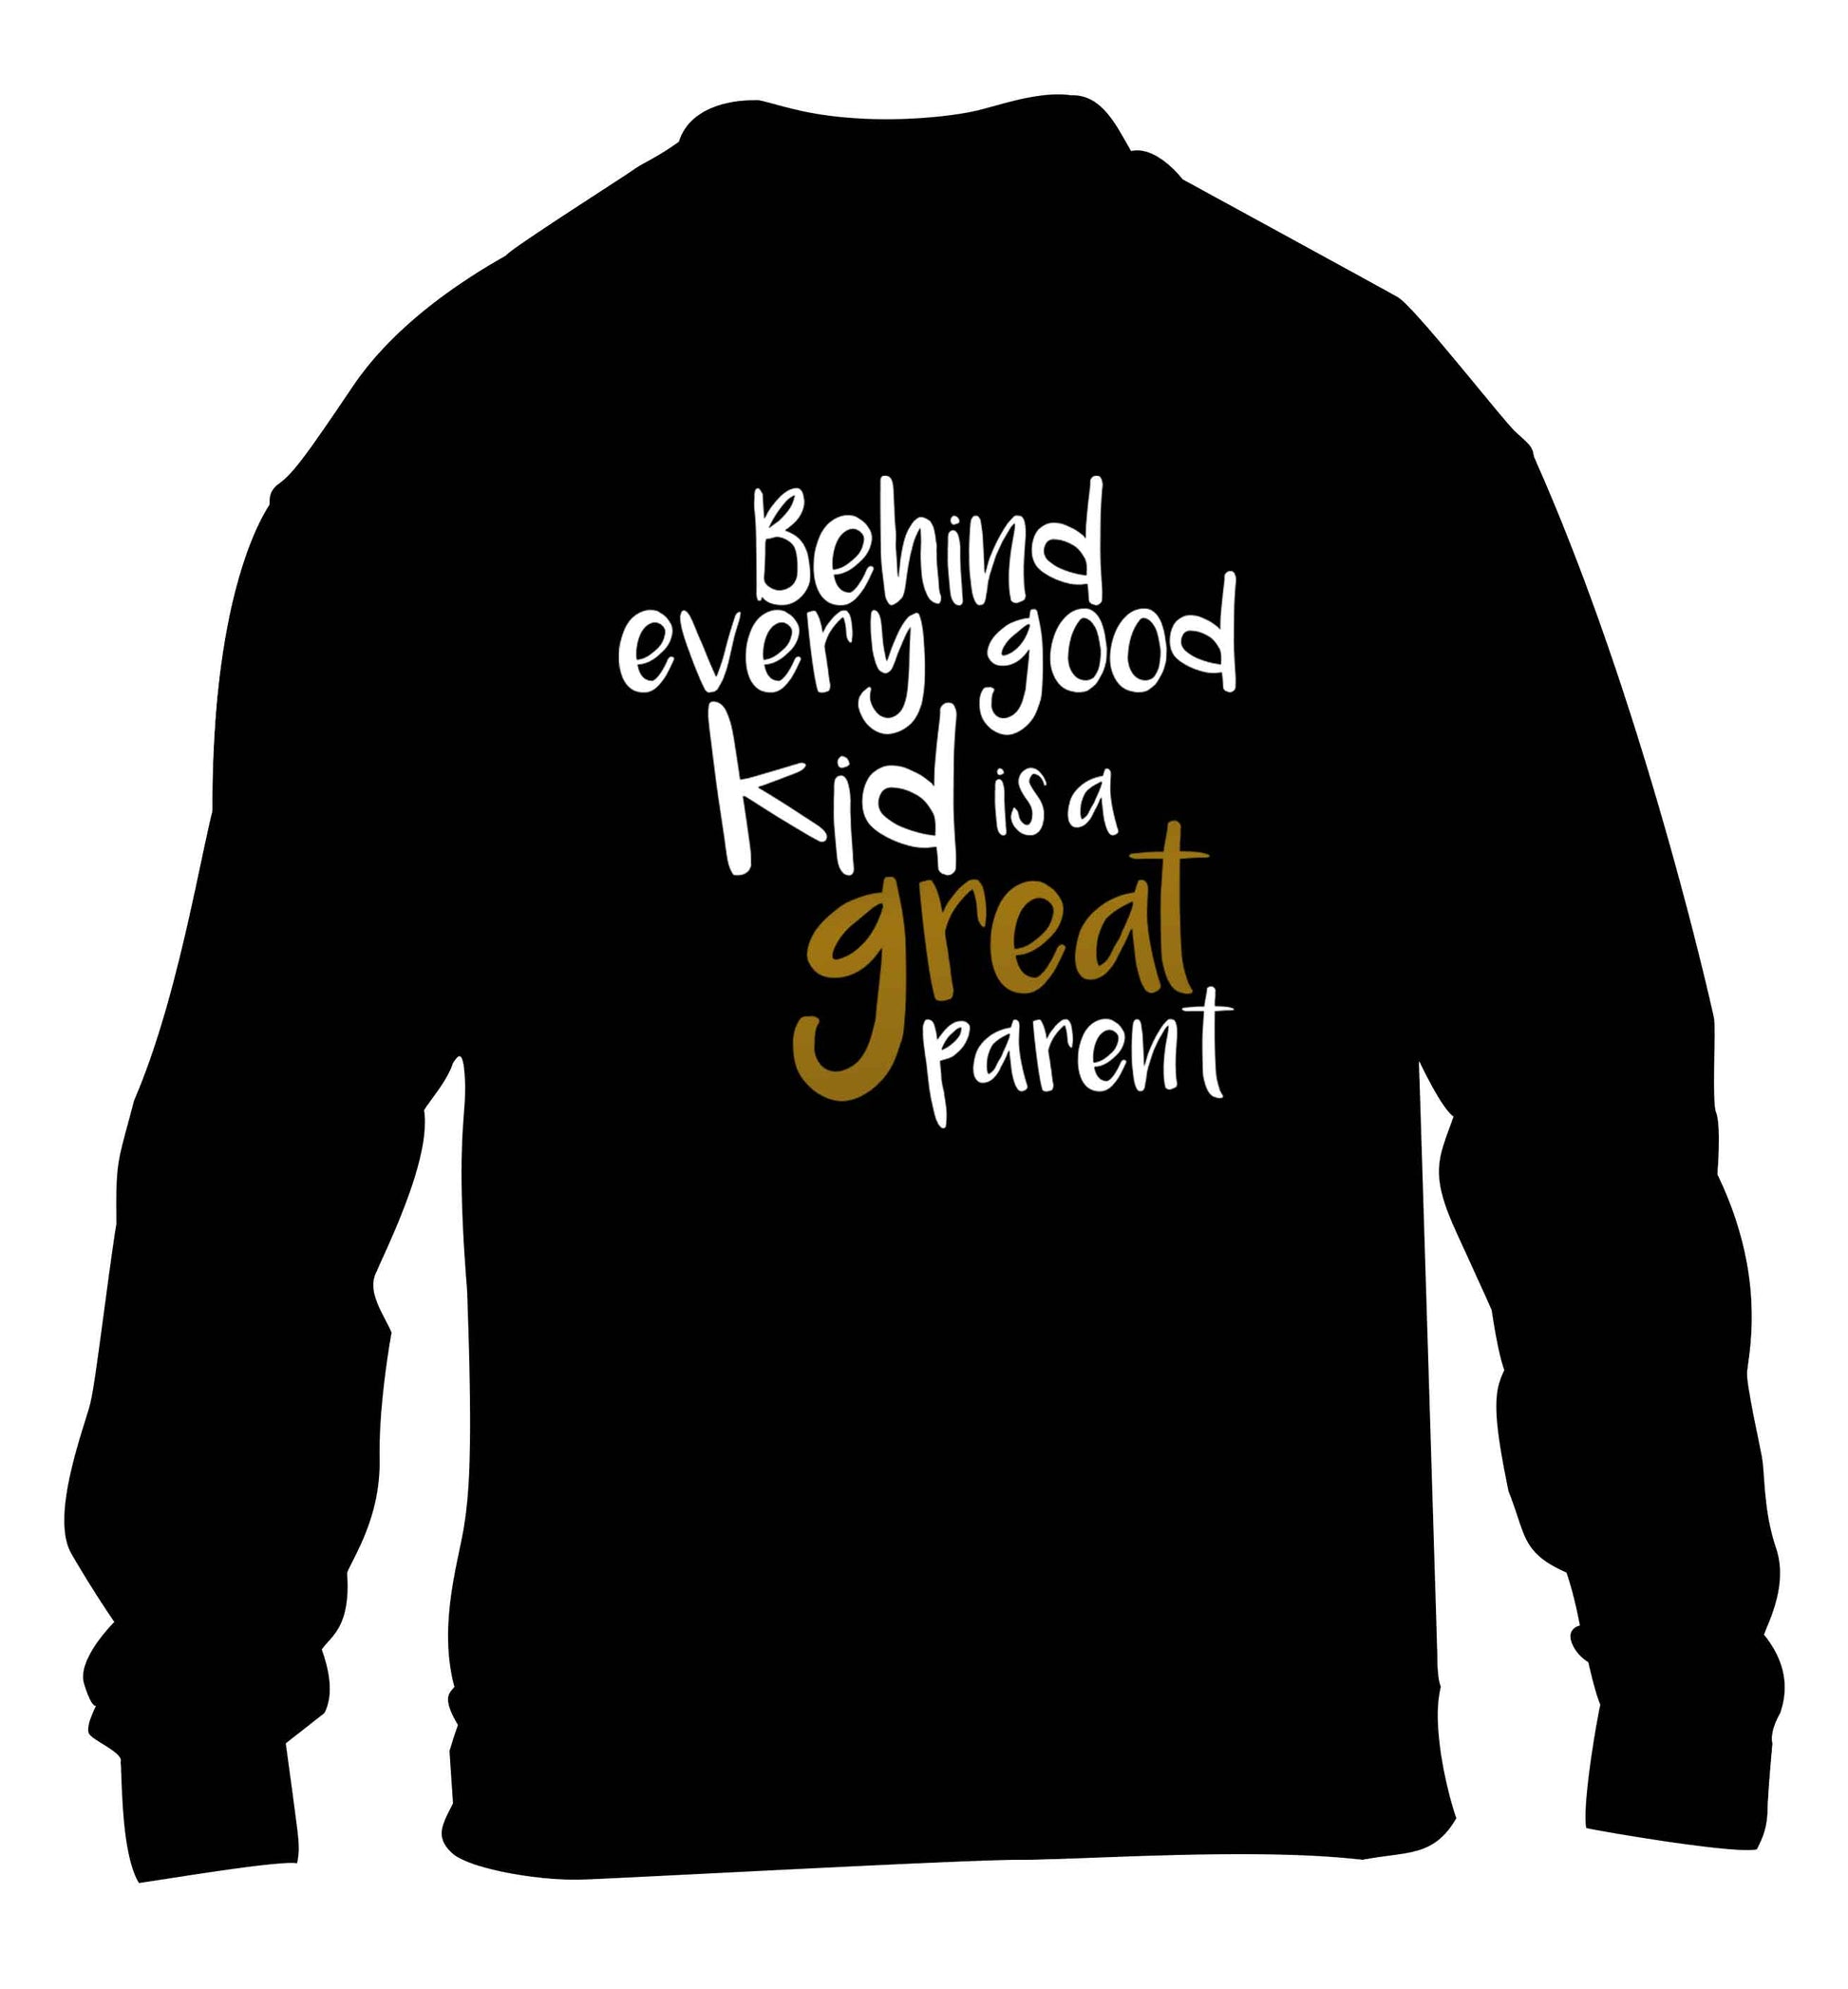 Behind every good kid is a great parent children's black sweater 12-13 Years